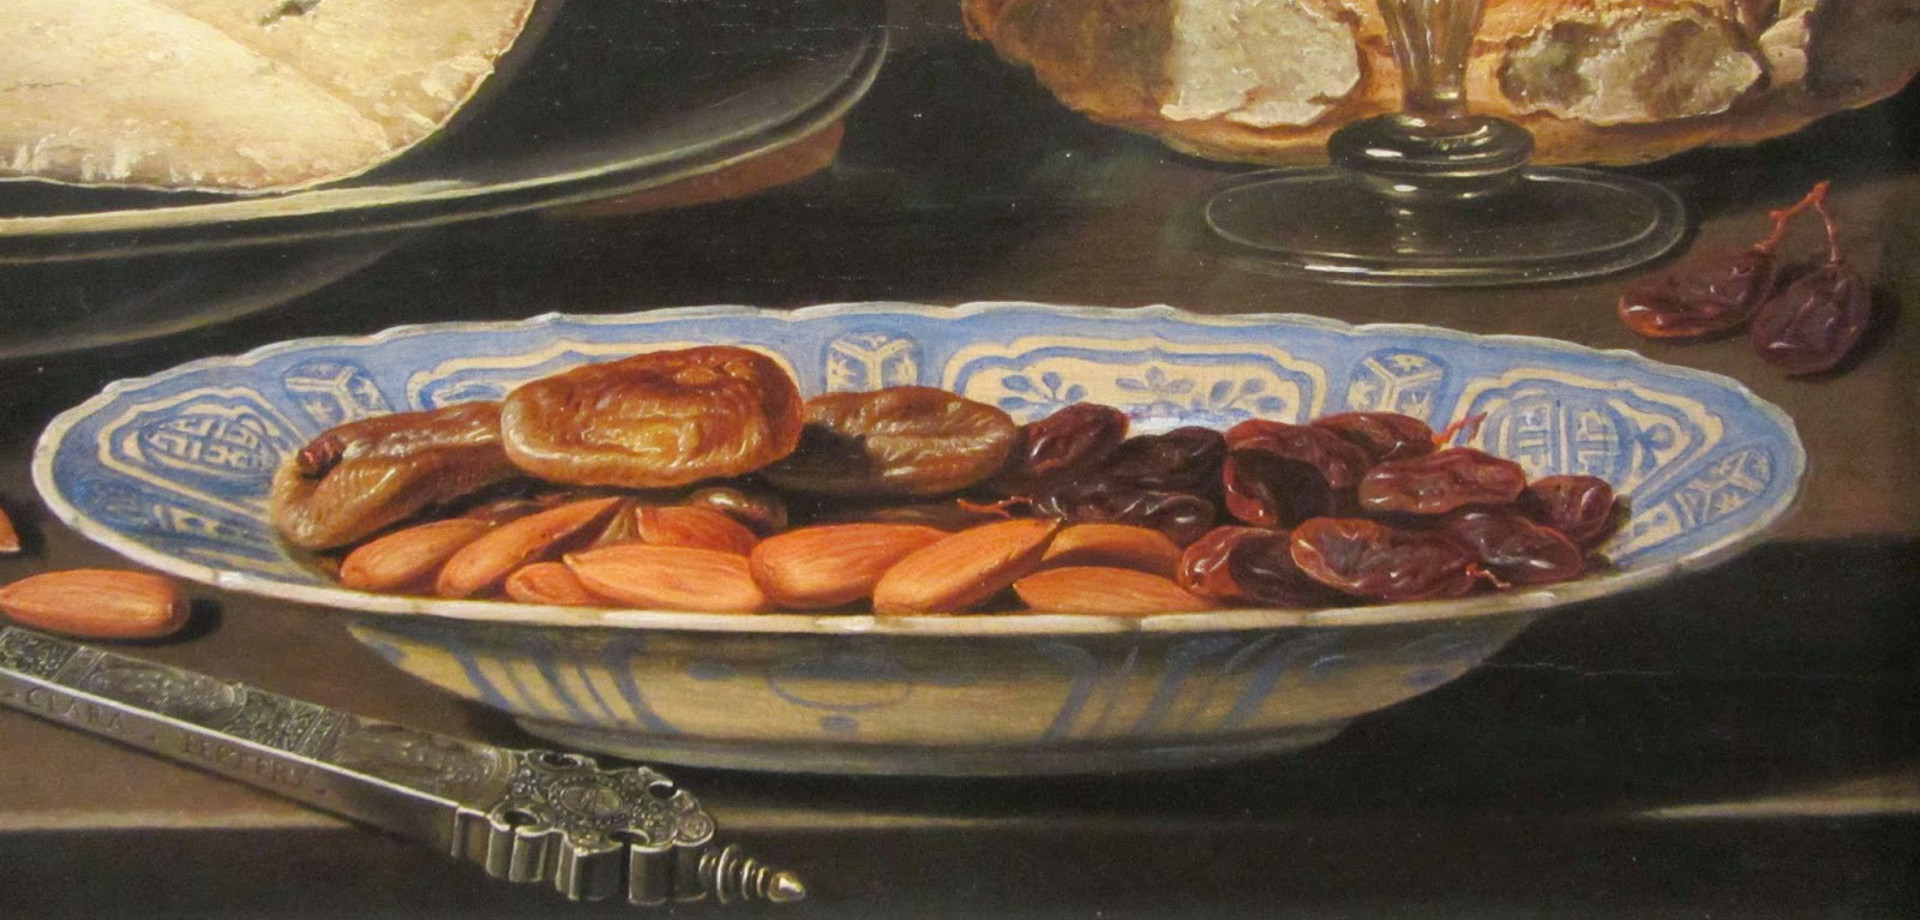 Slow Food: Still Lifes of the Golden Age